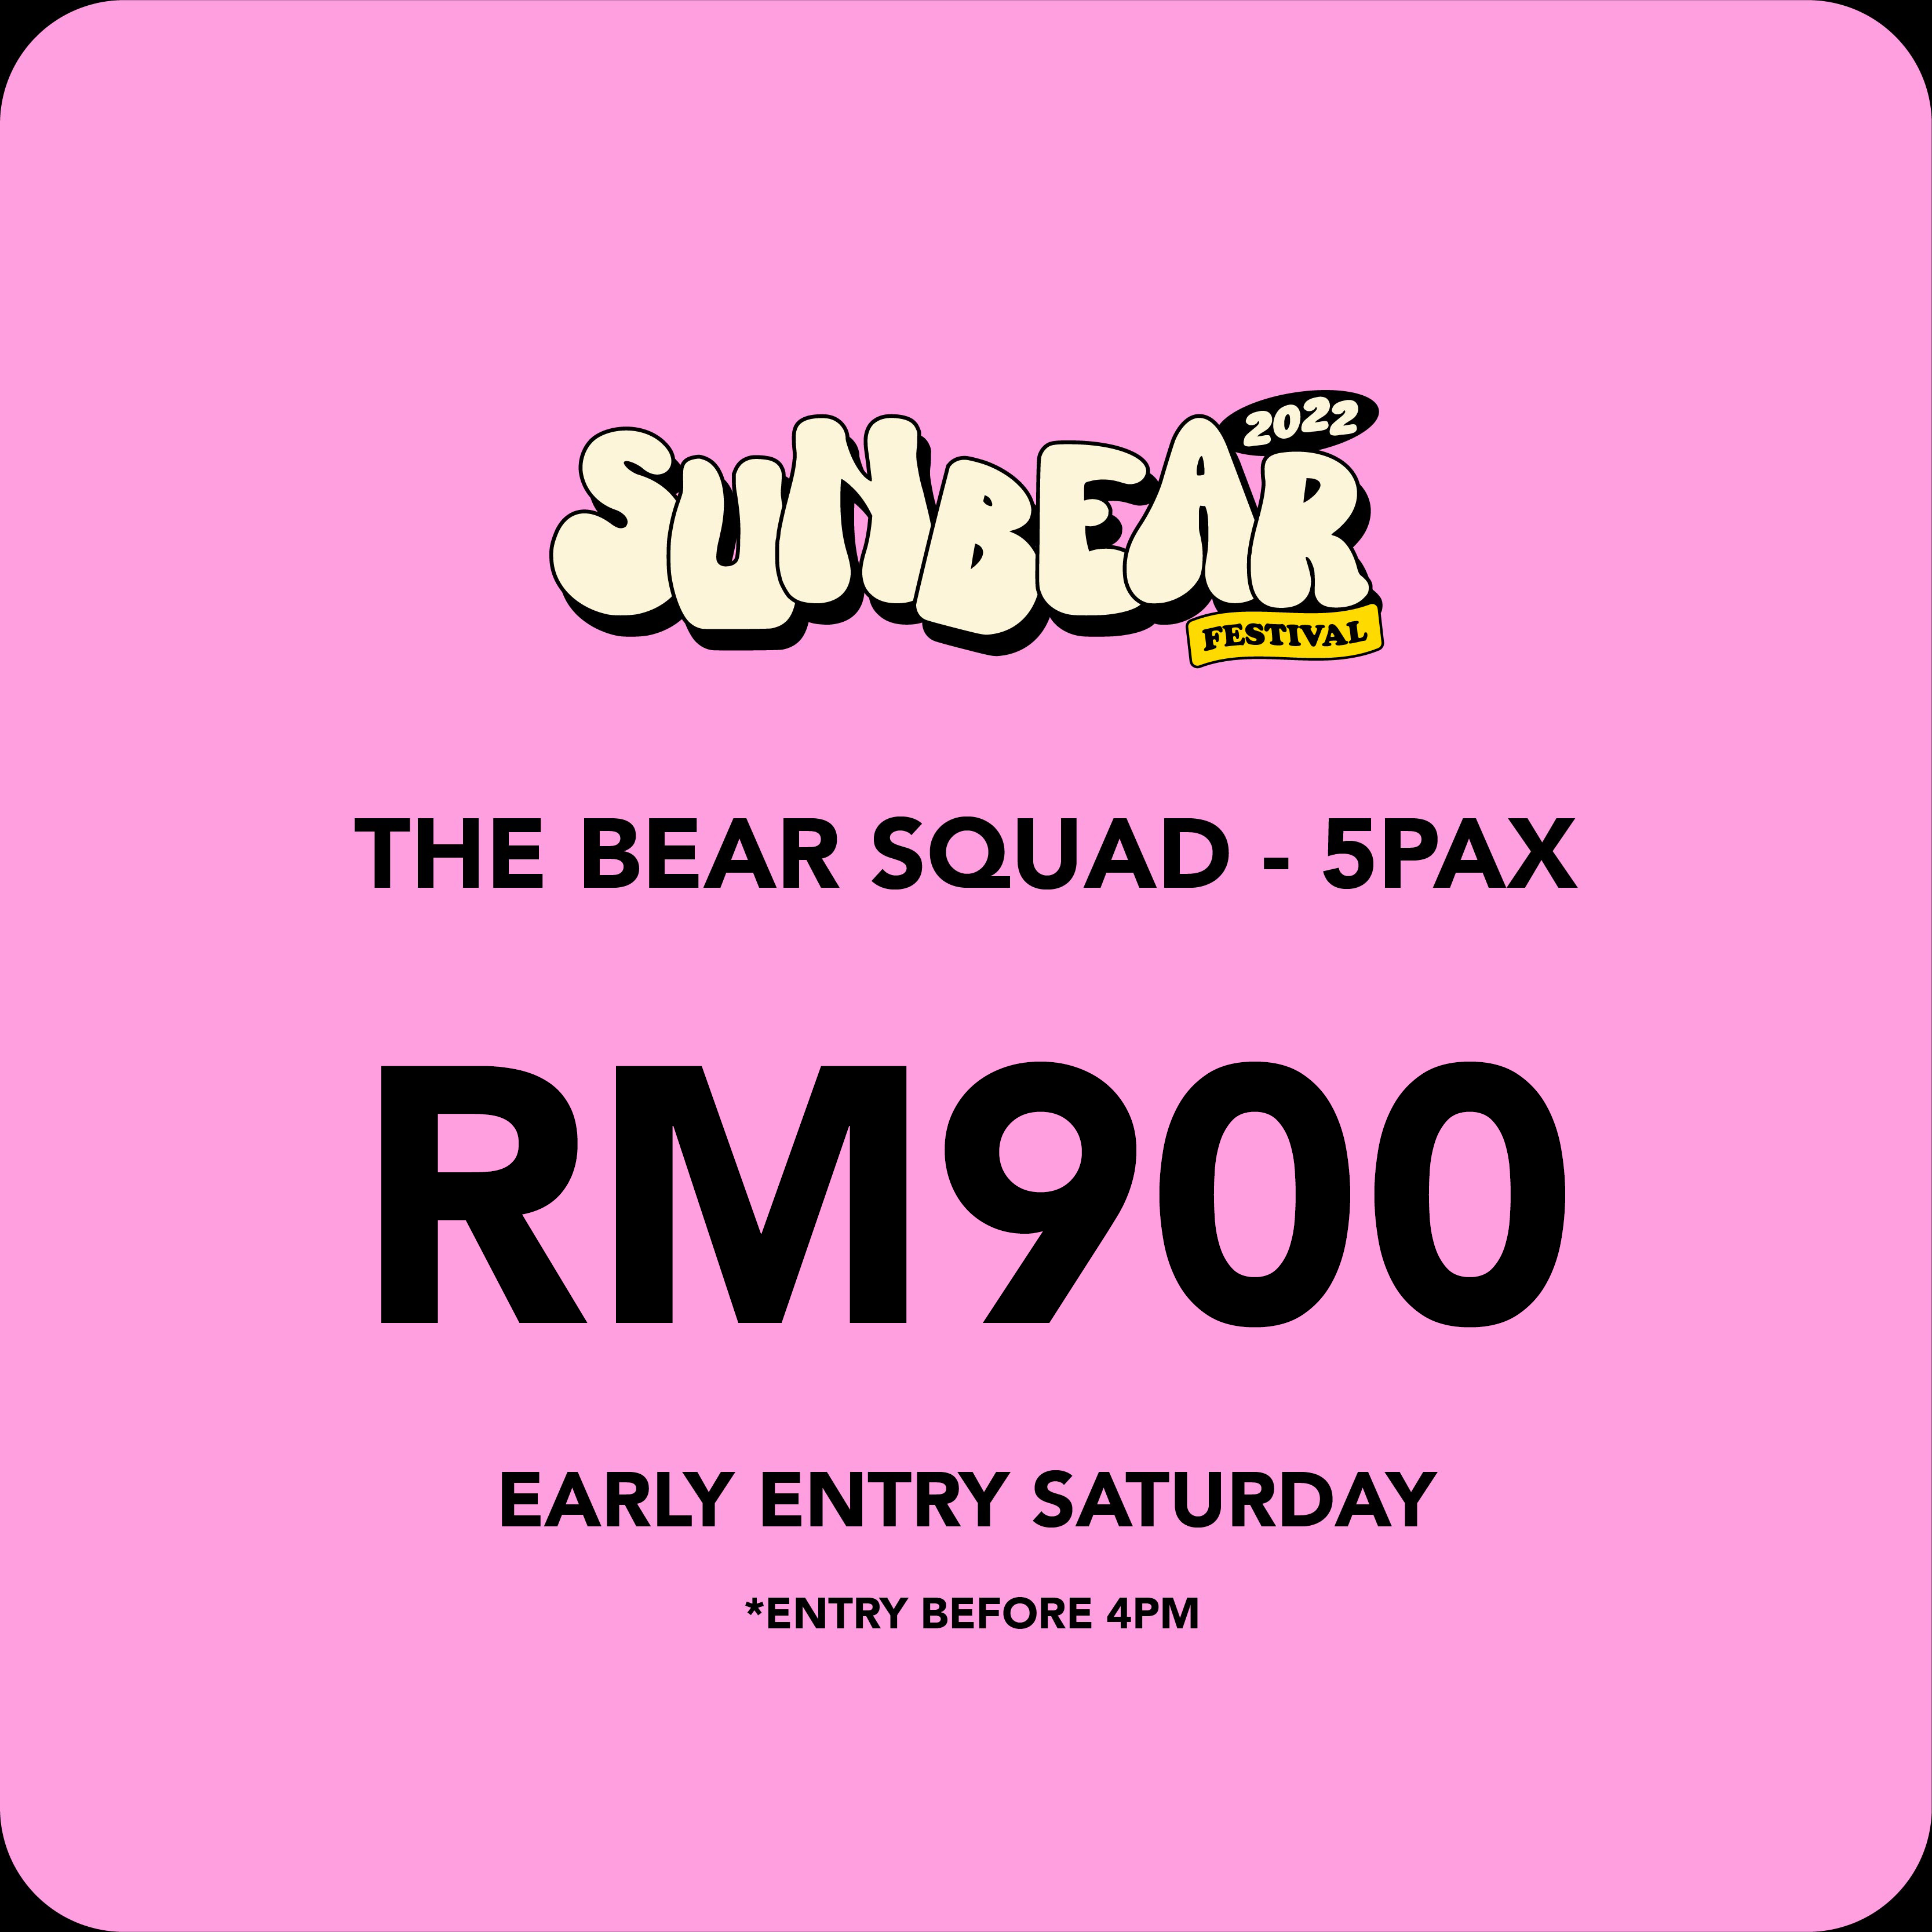 THE BEAR SQUAD EARLY ENTRY SATURDAY - 5 PAX